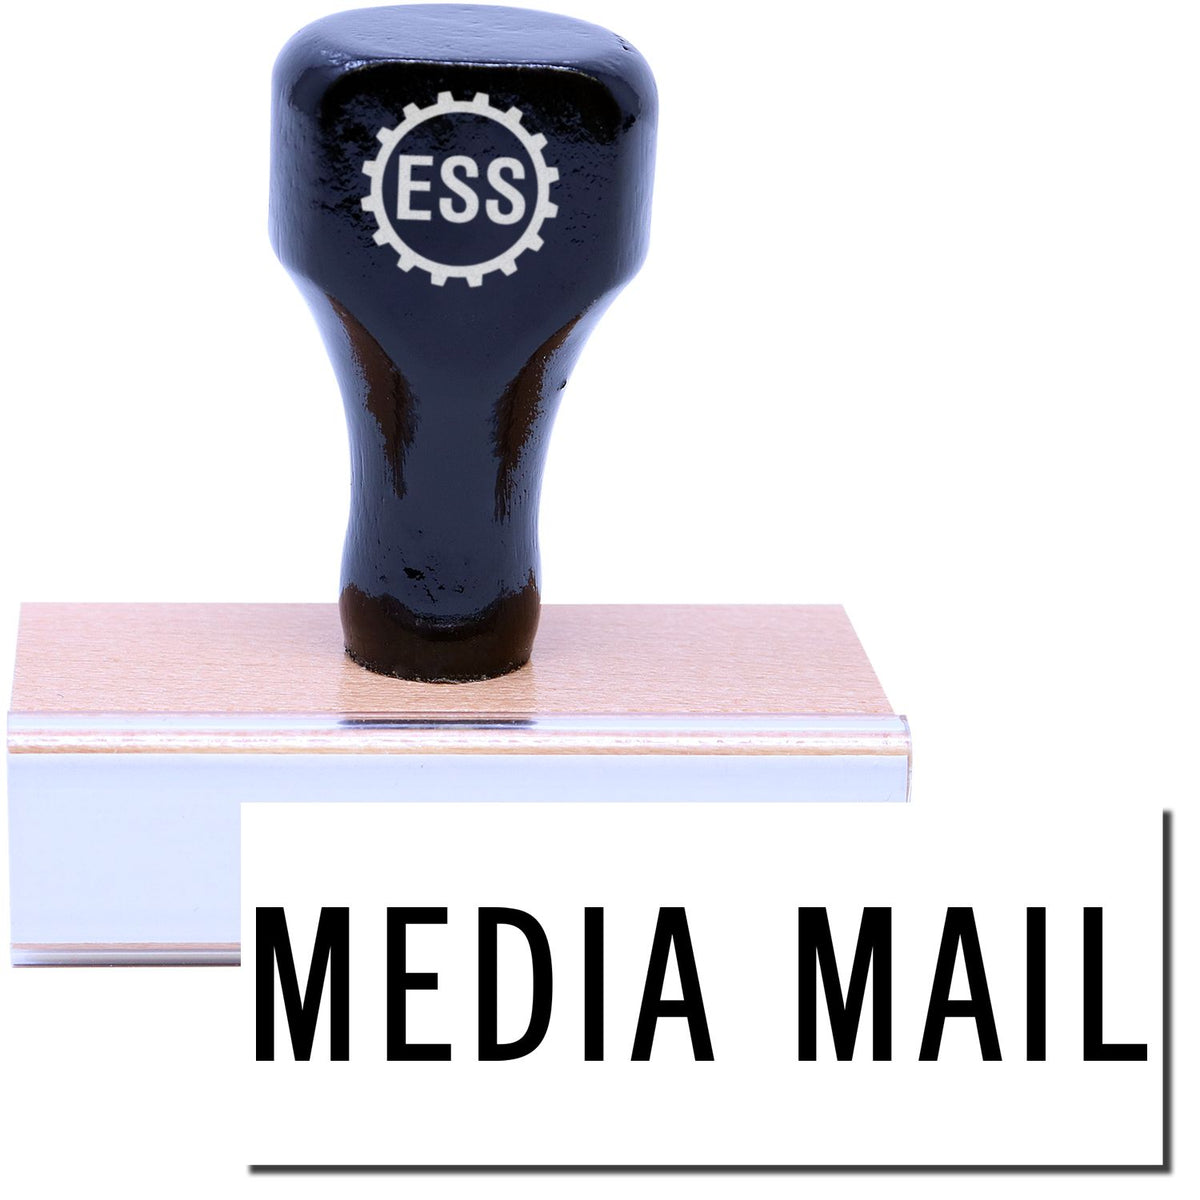 A stock office rubber stamp with a stamped image showing how the text &quot;MEDIA MAIL&quot; is displayed after stamping.